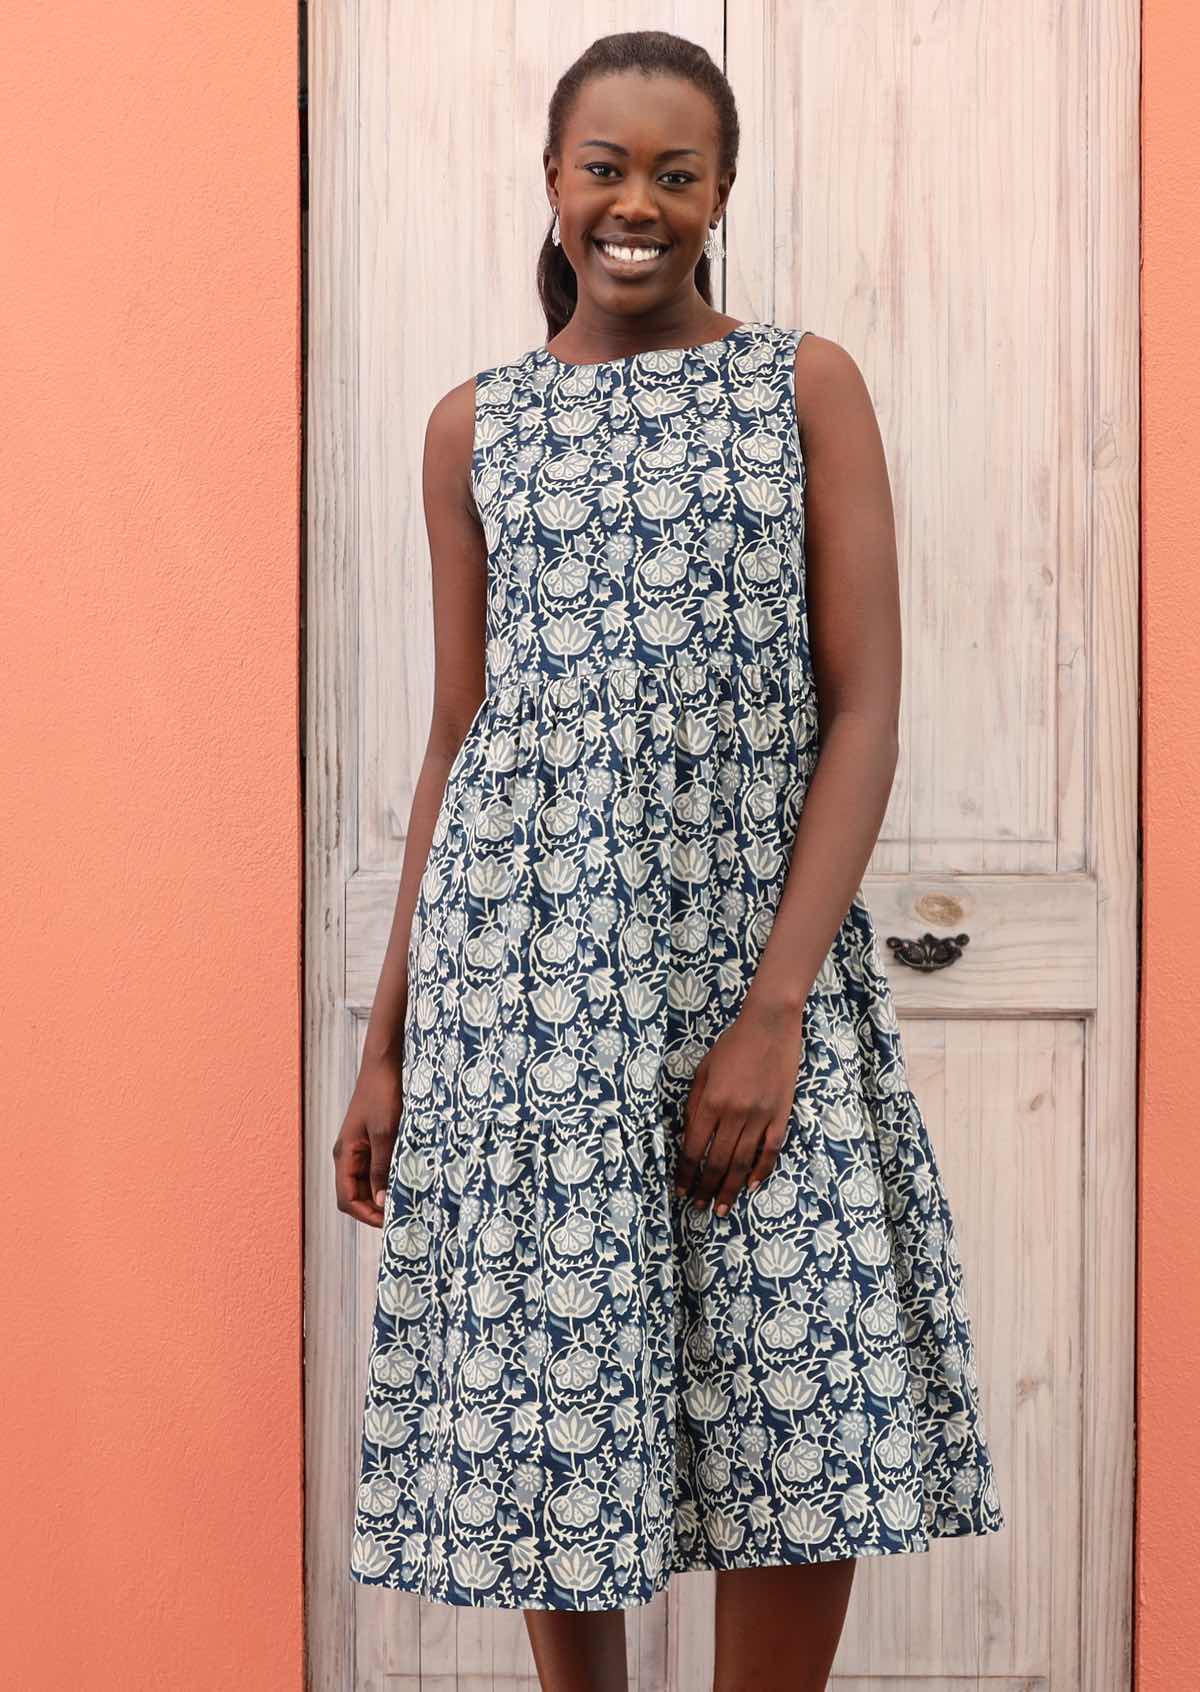 Smiling model wears a blue based dress with a white stamped floral pattern. 